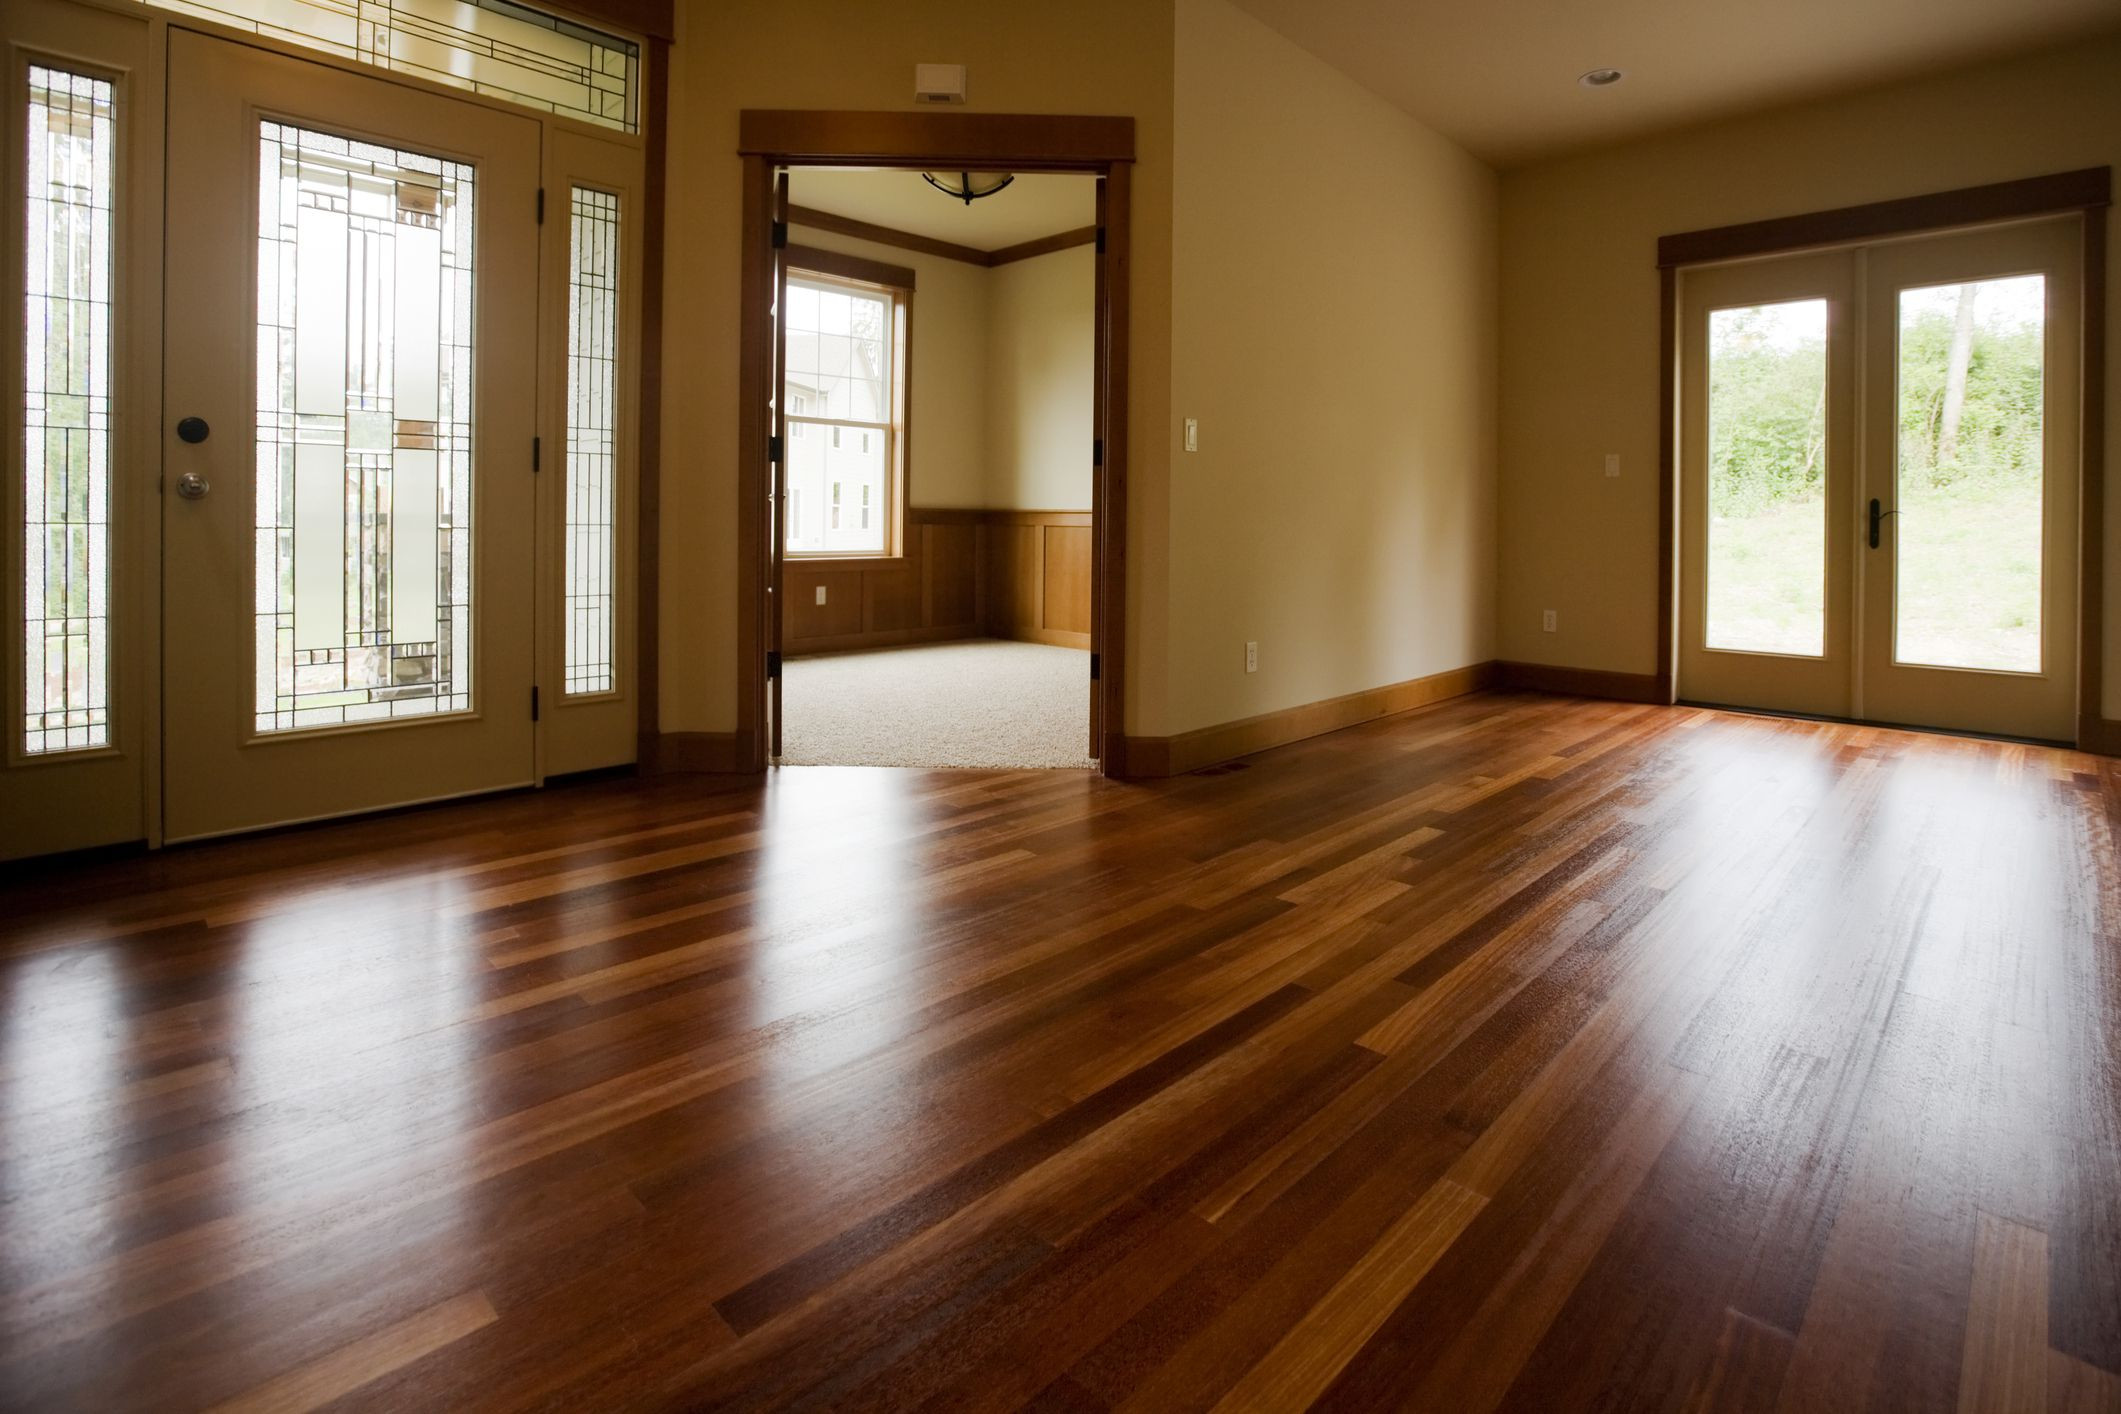 24 Recommended How Long Does It Take to Refinish Hardwood Floors 2023 free download how long does it take to refinish hardwood floors of types of hardwood flooring buyers guide with gettyimages 157332889 5886d8383df78c2ccd65d4e1